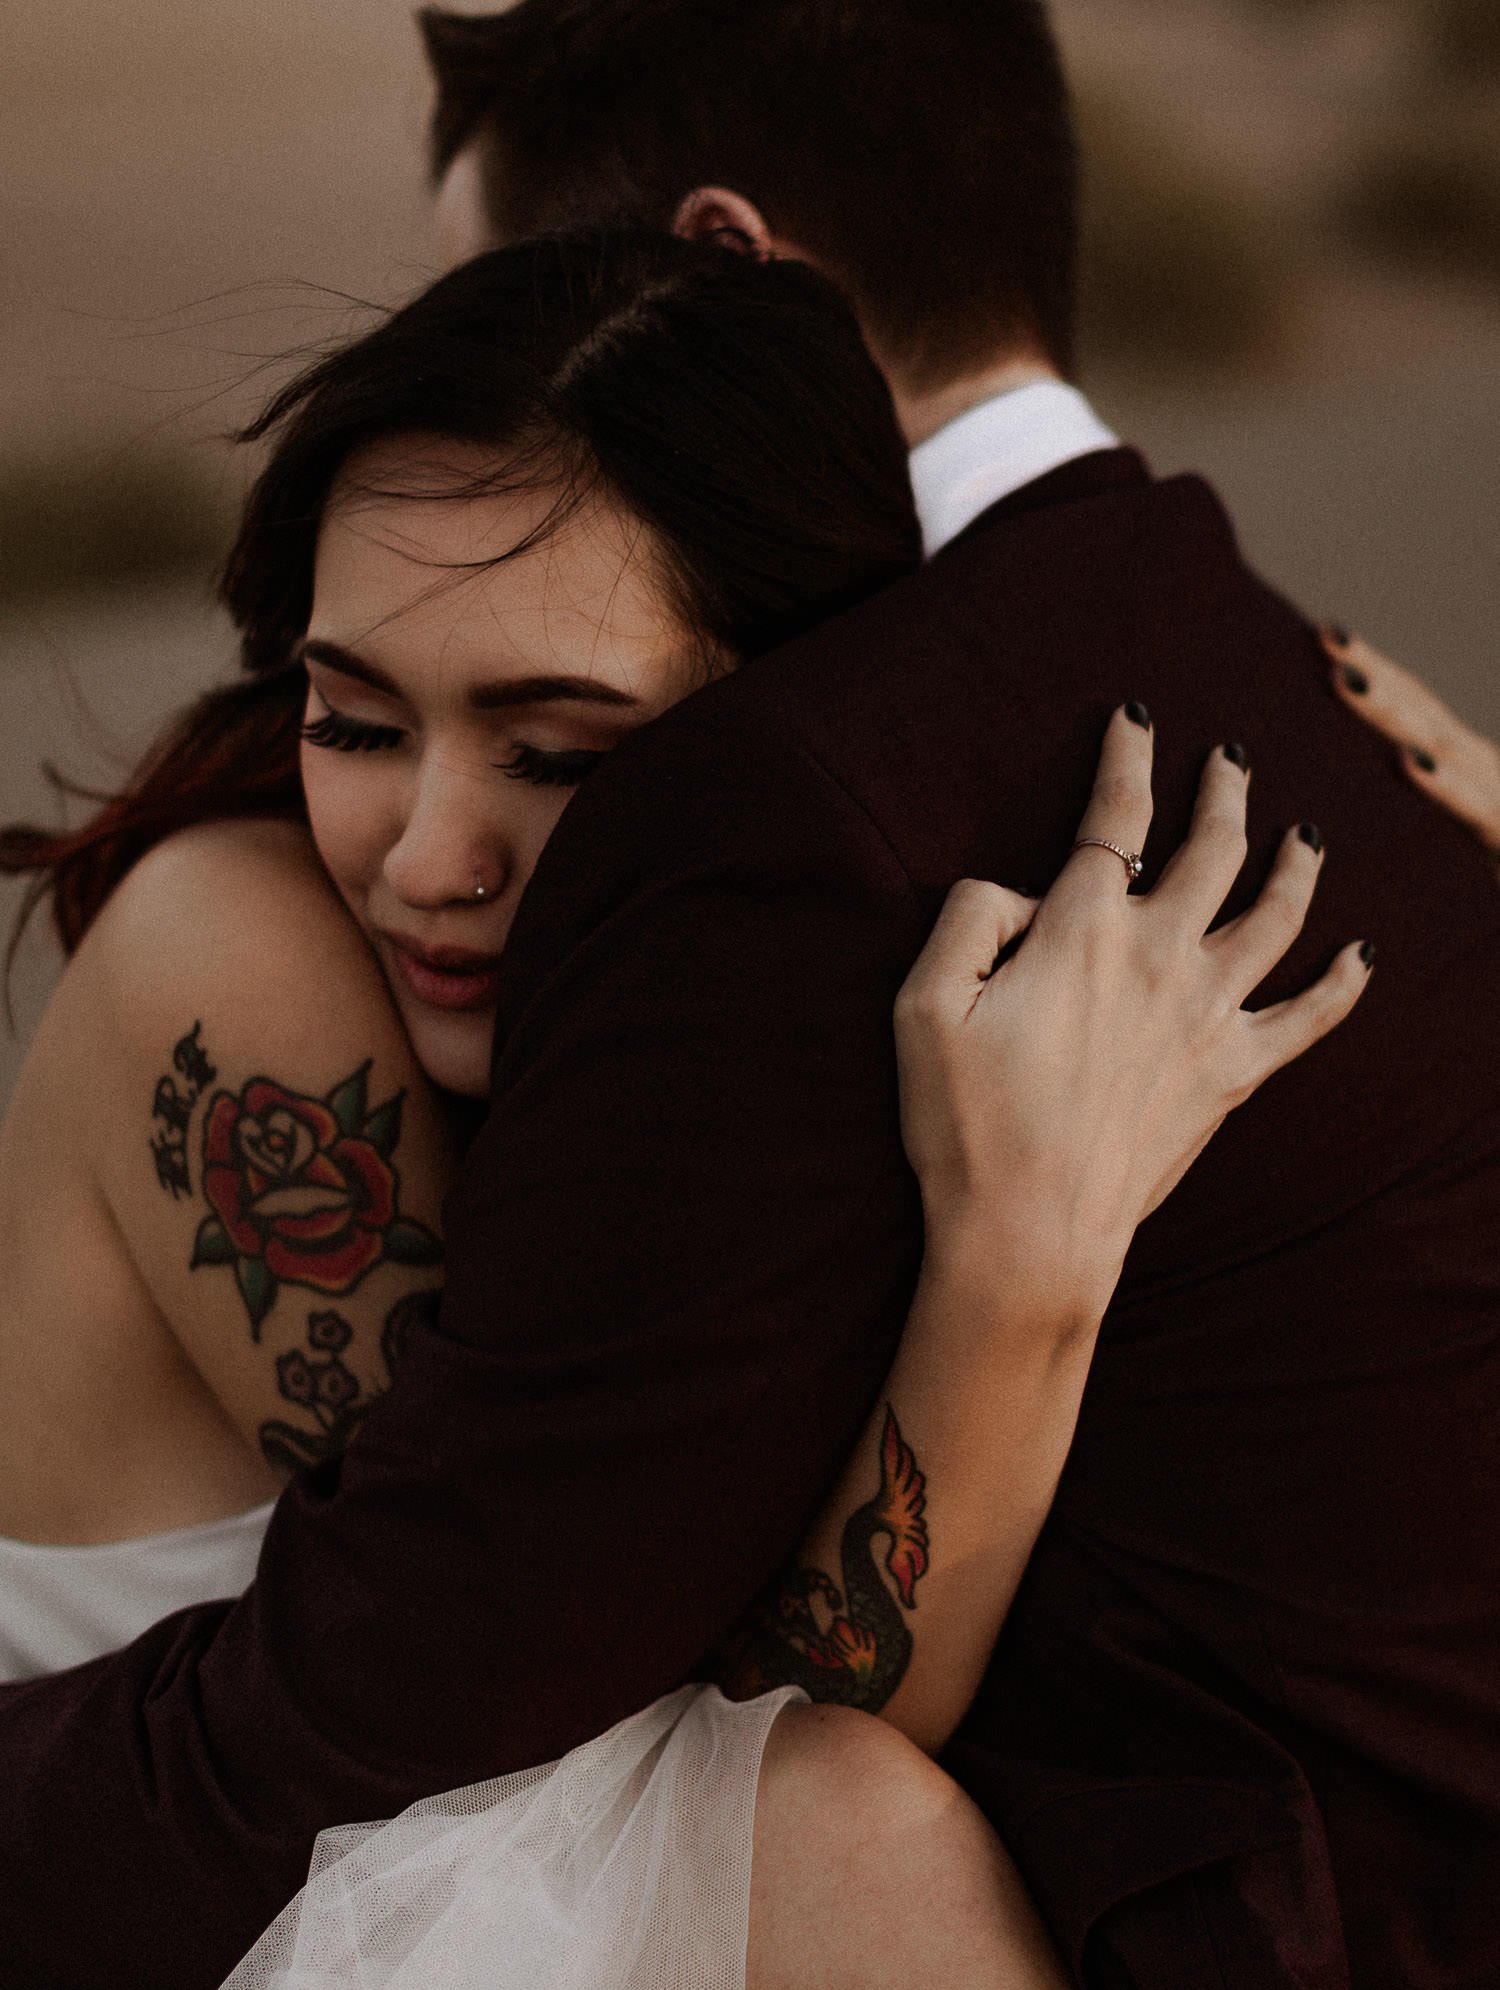 Bride hugs her groom tightly to stay warm from the wind in the desert. Oregon elopements can get a bit chilly with the wind at sunset